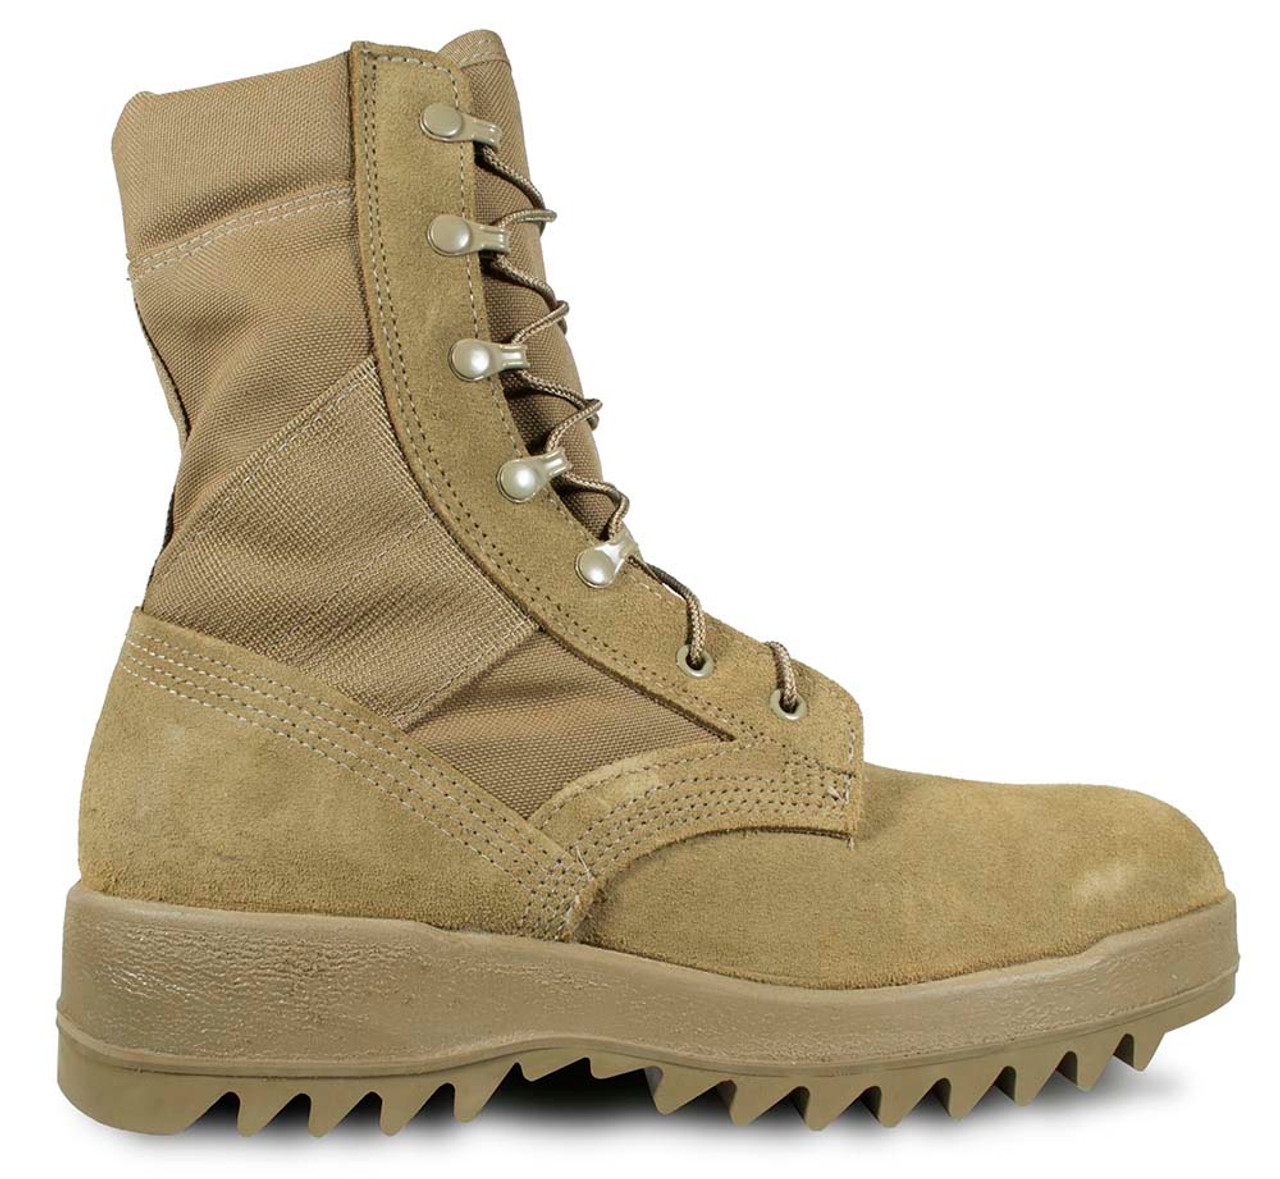 McRae Hot Weather Ripple Sole Combat Boot Coyote Brown USA Made